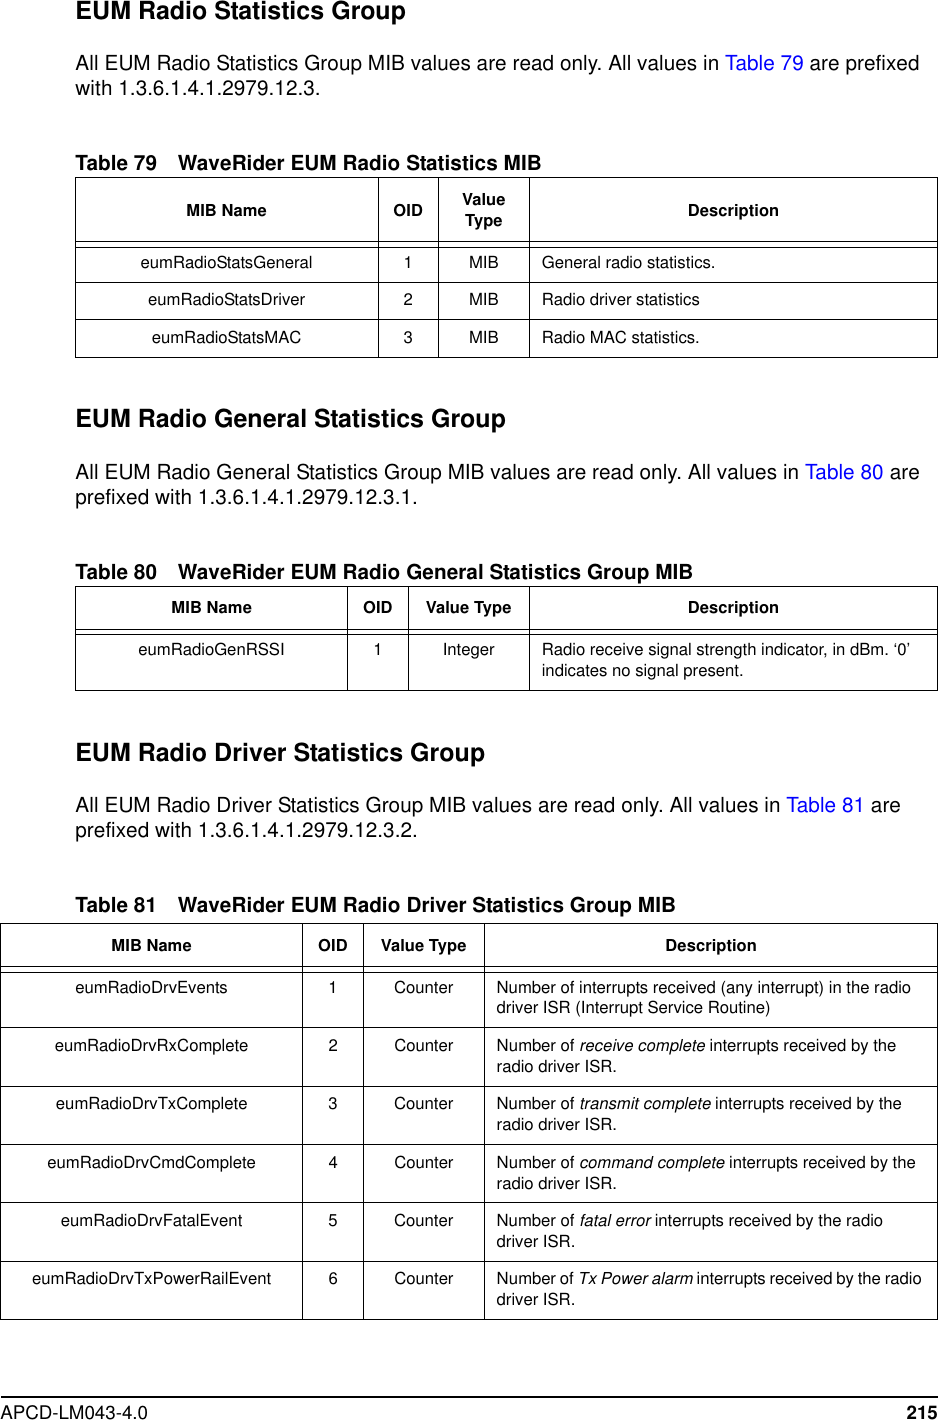 APCD-LM043-4.0 215EUM Radio Statistics GroupAll EUM Radio Statistics Group MIB values are read only. All values in Table 79 are prefixedwith 1.3.6.1.4.1.2979.12.3.Table 79 WaveRider EUM Radio Statistics MIBEUM Radio General Statistics GroupAll EUM Radio General Statistics Group MIB values are read only. All values in Table 80 areprefixed with 1.3.6.1.4.1.2979.12.3.1.Table 80 WaveRider EUM Radio General Statistics Group MIBEUM Radio Driver Statistics GroupAll EUM Radio Driver Statistics Group MIB values are read only. All values in Table 81 areprefixed with 1.3.6.1.4.1.2979.12.3.2.Table 81 WaveRider EUM Radio Driver Statistics Group MIBMIB Name OID ValueType DescriptioneumRadioStatsGeneral 1 MIB General radio statistics.eumRadioStatsDriver 2MIB Radio driver statisticseumRadioStatsMAC 3MIB Radio MAC statistics.MIB Name OID Value Type DescriptioneumRadioGenRSSI 1 Integer Radio receive signal strength indicator, in dBm. ‘0’indicates no signal present.MIB Name OID Value Type DescriptioneumRadioDrvEvents 1 Counter Number of interrupts received (any interrupt) in the radiodriver ISR (Interrupt Service Routine)eumRadioDrvRxComplete 2 Counter Number of receive complete interrupts received by theradio driver ISR.eumRadioDrvTxComplete 3 Counter Number of transmit complete interrupts received by theradio driver ISR.eumRadioDrvCmdComplete 4 Counter Number of command complete interrupts received by theradio driver ISR.eumRadioDrvFatalEvent 5 Counter Number of fatal error interrupts received by the radiodriver ISR.eumRadioDrvTxPowerRailEvent 6 Counter Number of Tx Power alarm interrupts received by the radiodriver ISR.